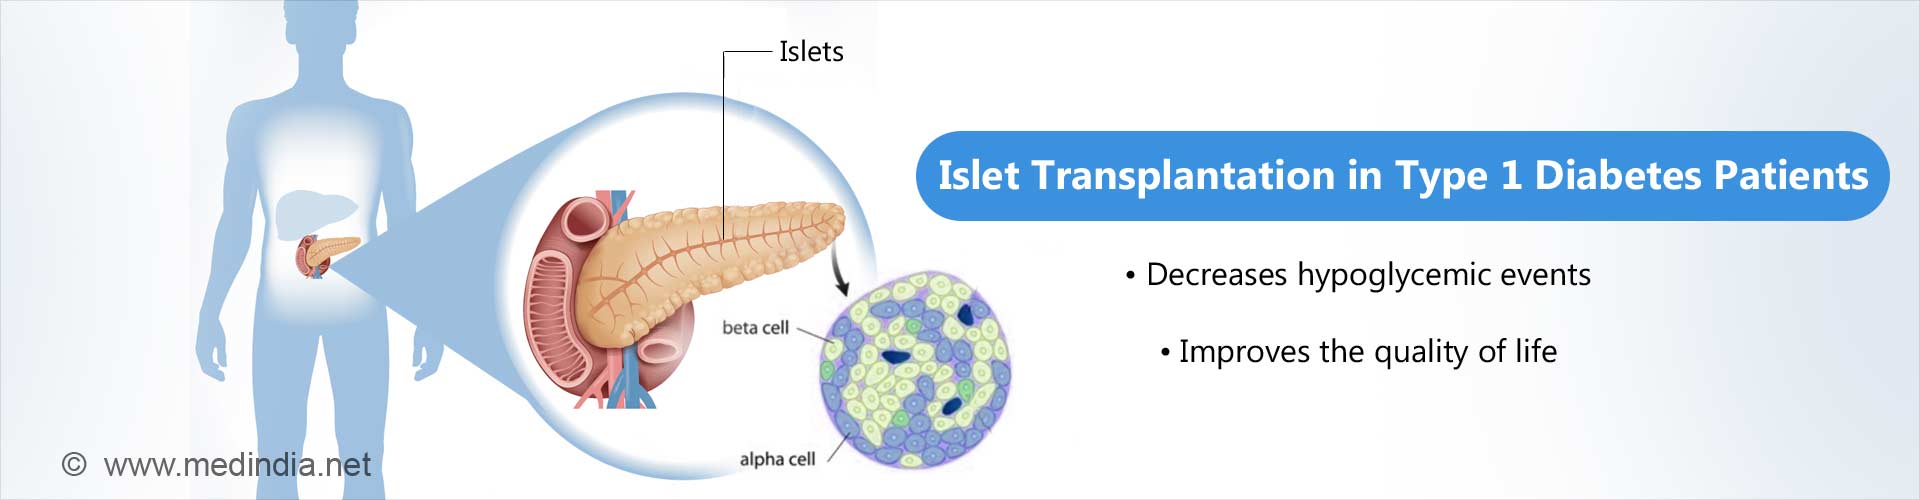 islet transplantation in type 1 diabetes patients
- decreases hypoglcemic events
- improves the quality of life